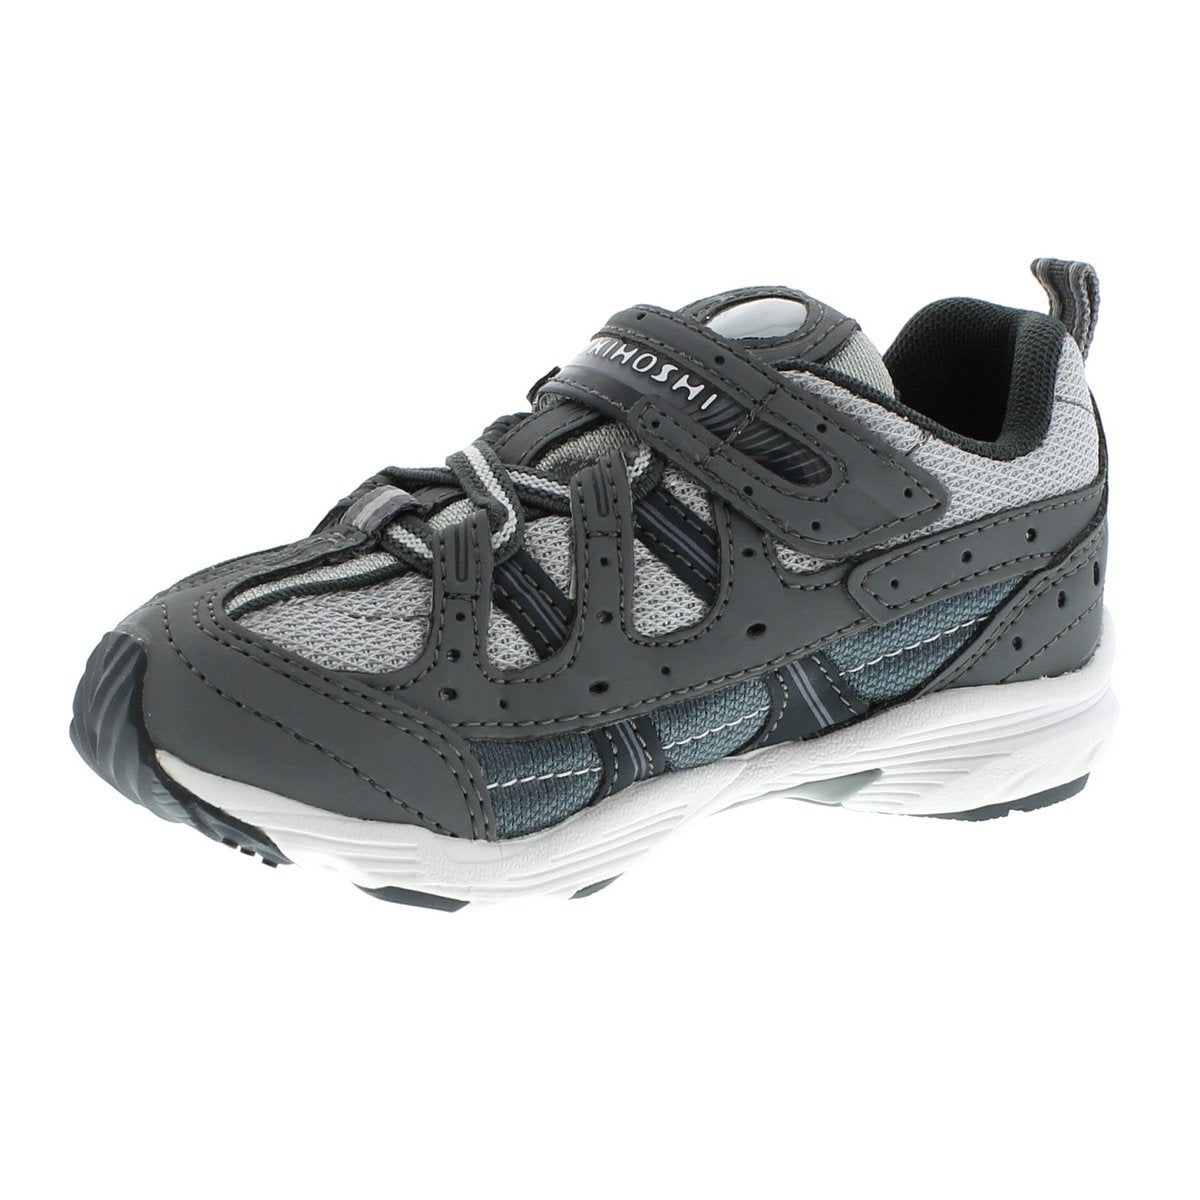 Childrens Tsukihoshi Speed Sneaker in Gray/Gray from the front view